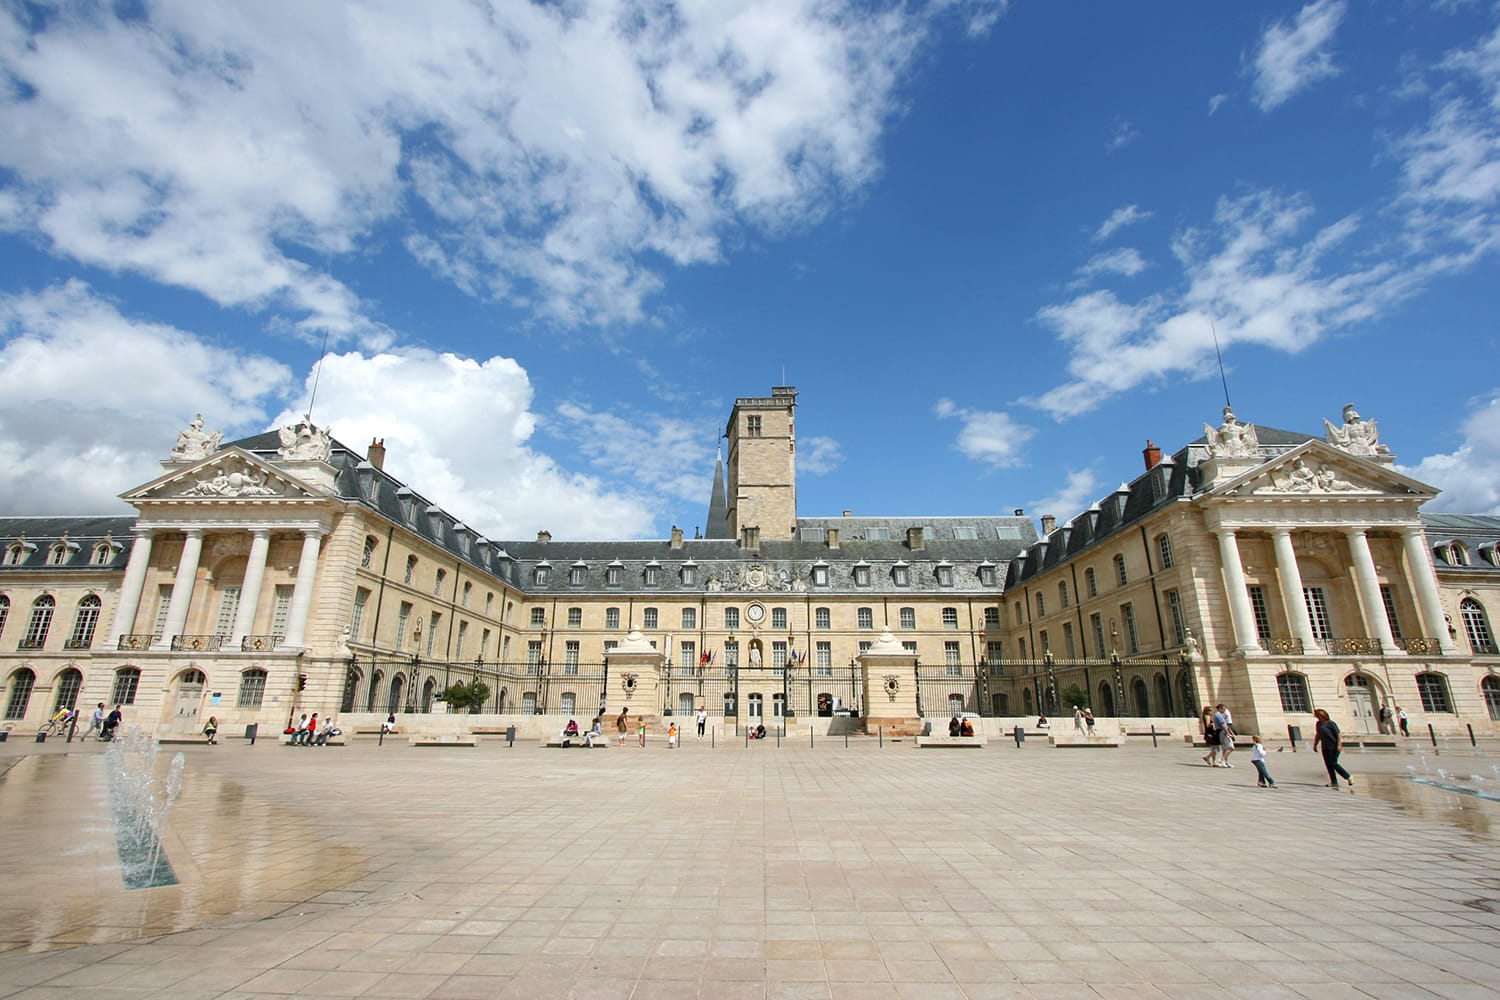 Liberation Square and the Palace of Dukes of Burgundy (Palais des ducs de Bourgogne) in Dijon, France